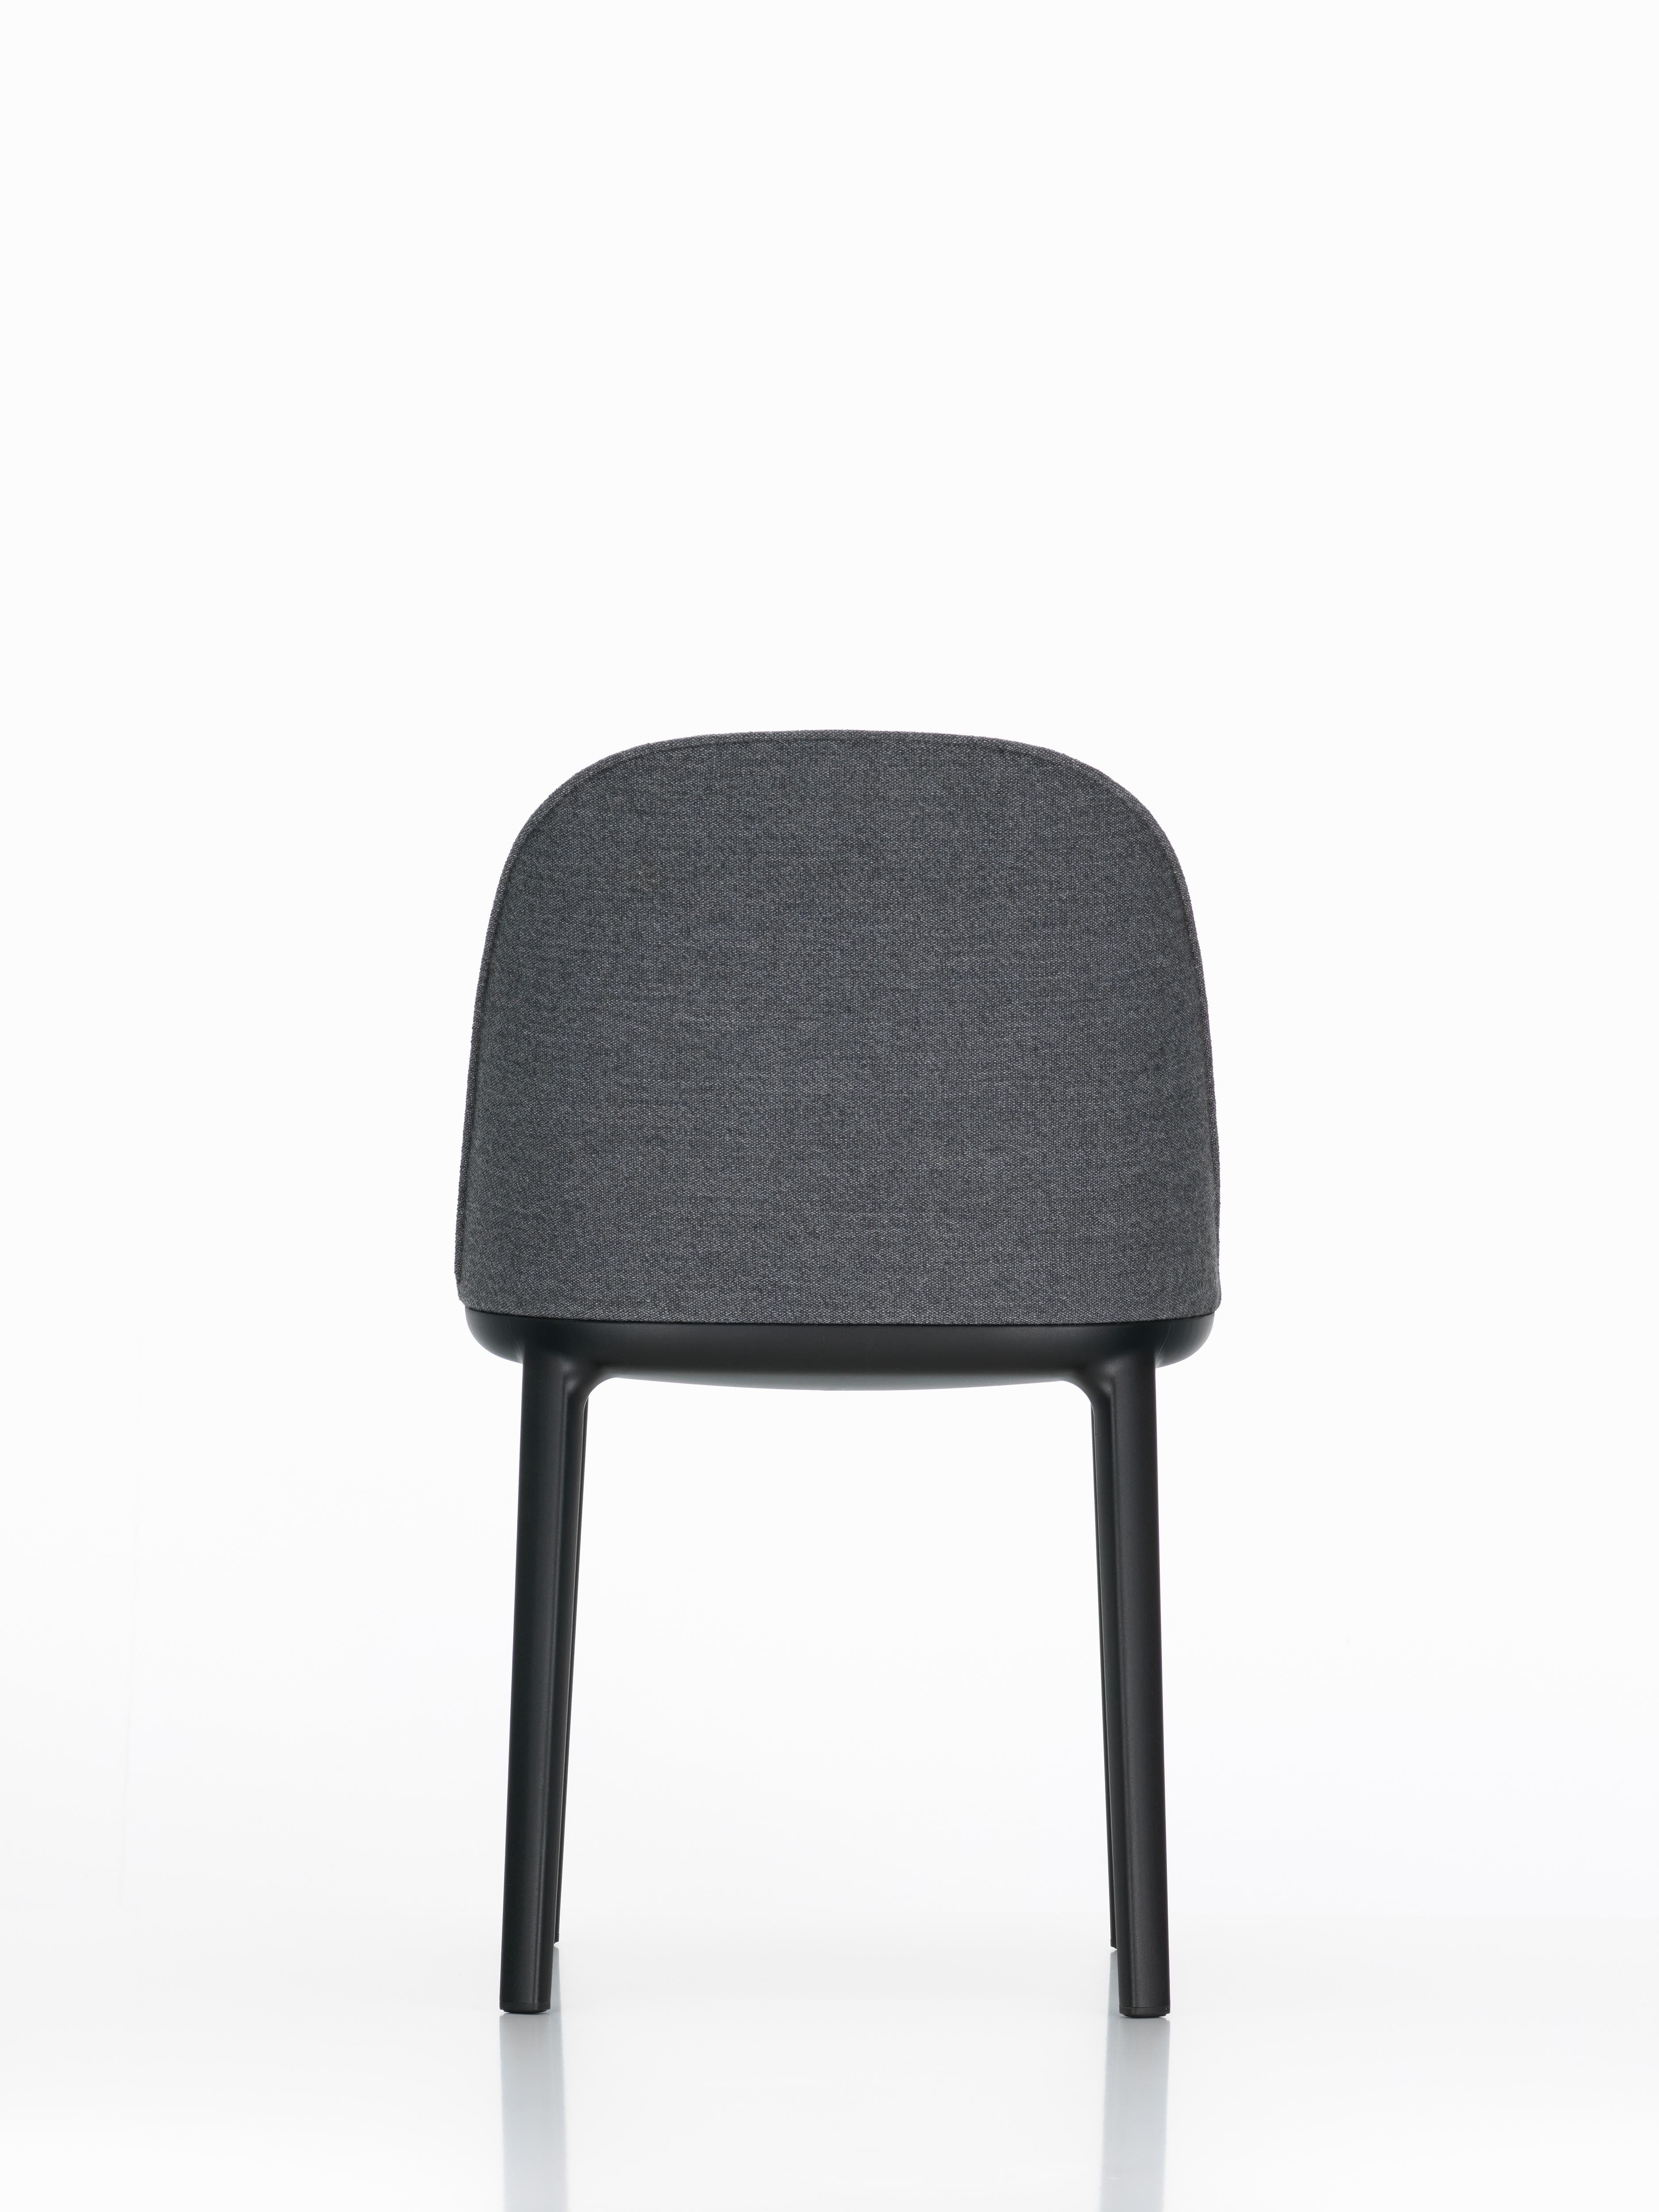 Contemporary Vitra Softshell Side Chair in Dark Grey Plano by Ronan & Erwan Bouroullec For Sale